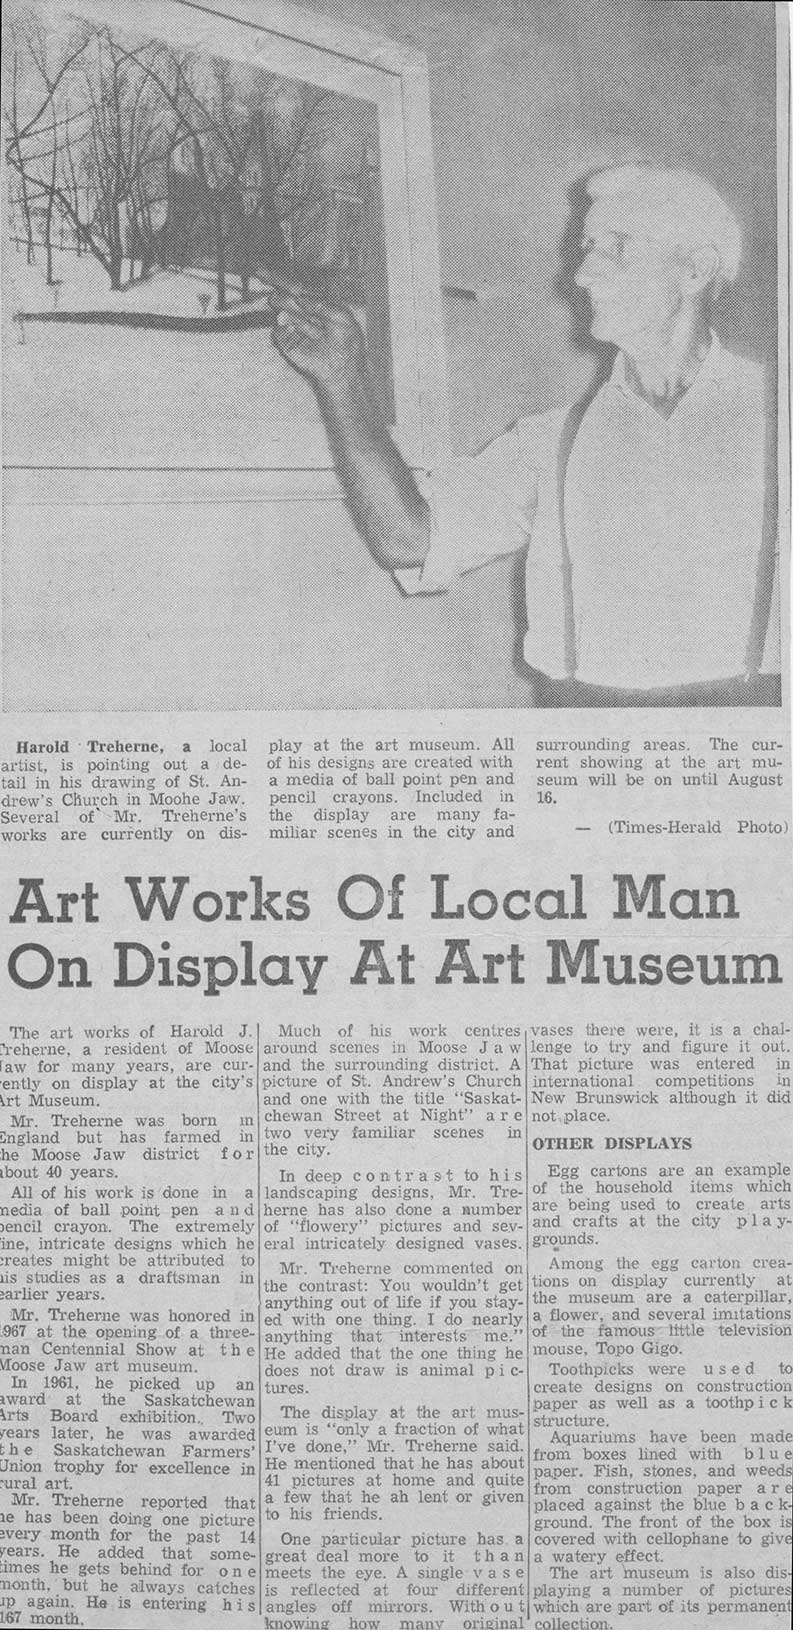 Art Works of Local Man on Display at Art Museum - Moose Jaw Times-Herald 1968